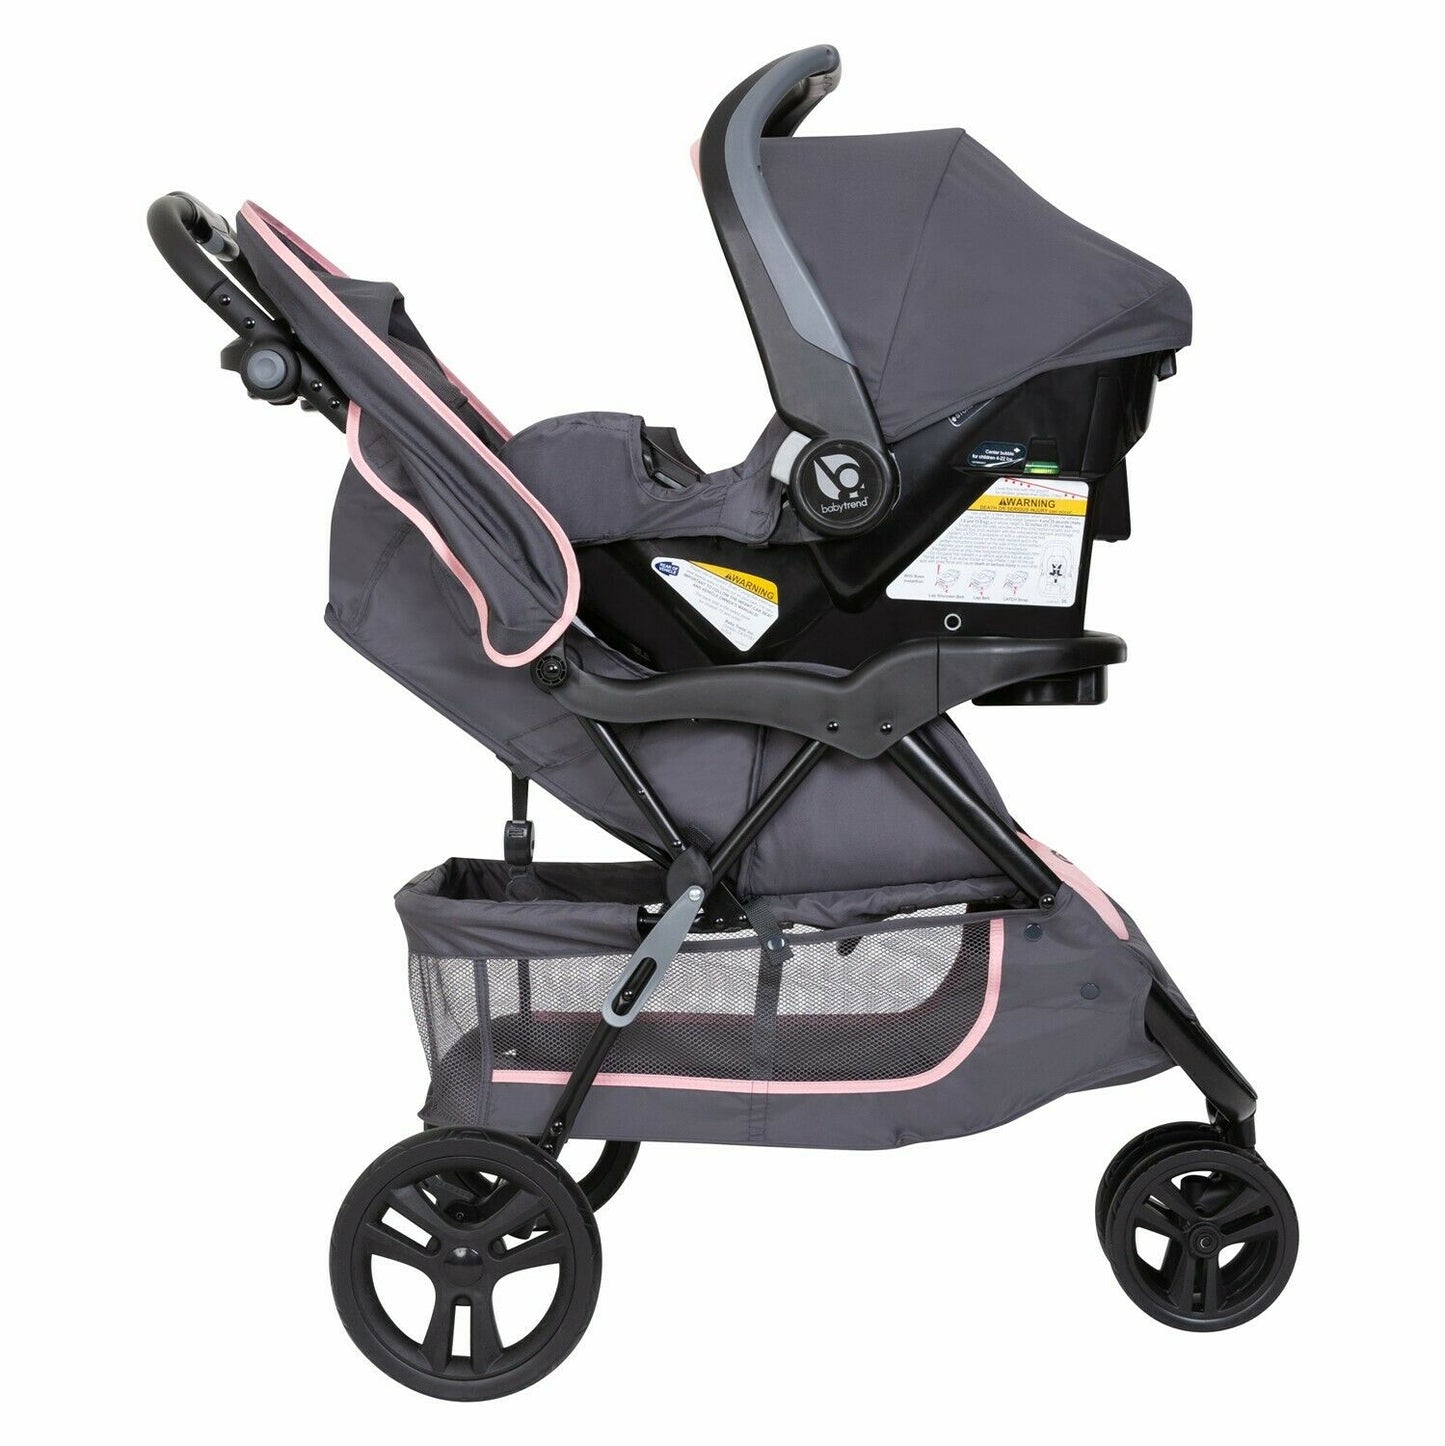 Combo Baby Stroller with Car Seat Travel System Playard High Chair Diaper Bag